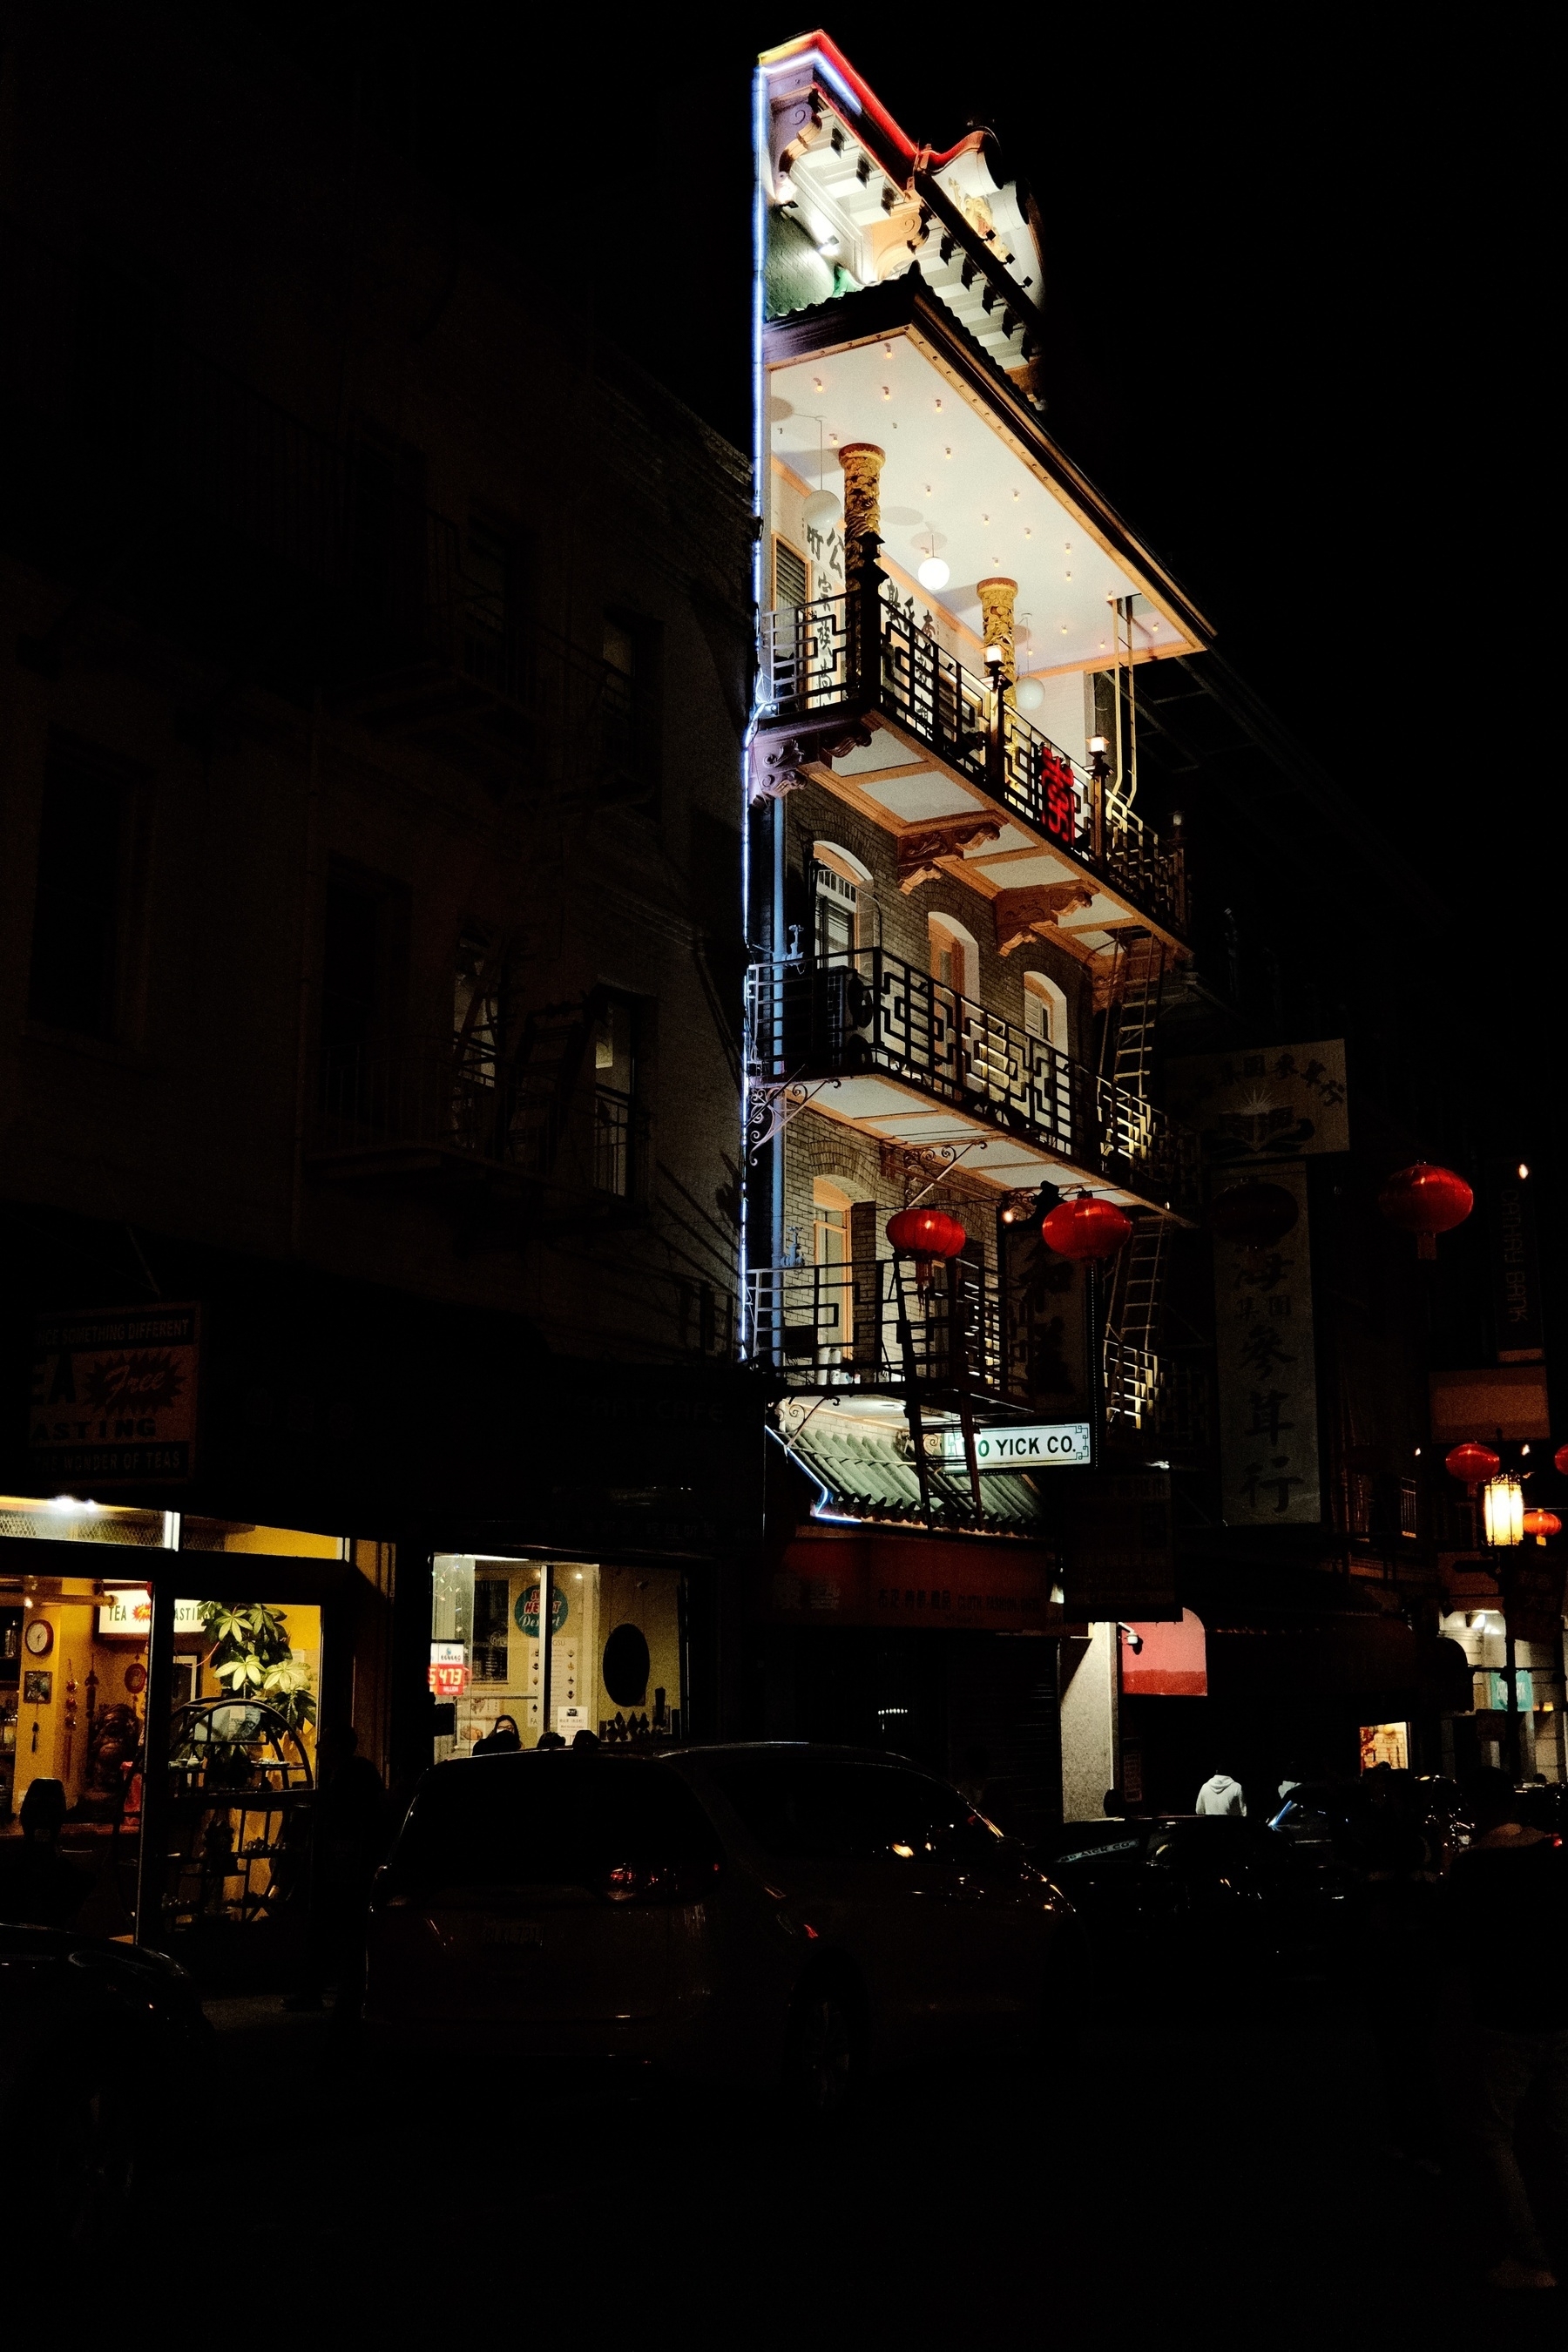 It is night in the city where there’s a five story building where the front is only lit up. Small li windows reveal shops are along the dark street. There are a few red unlit Chinese New Year lanterns strung across the street.